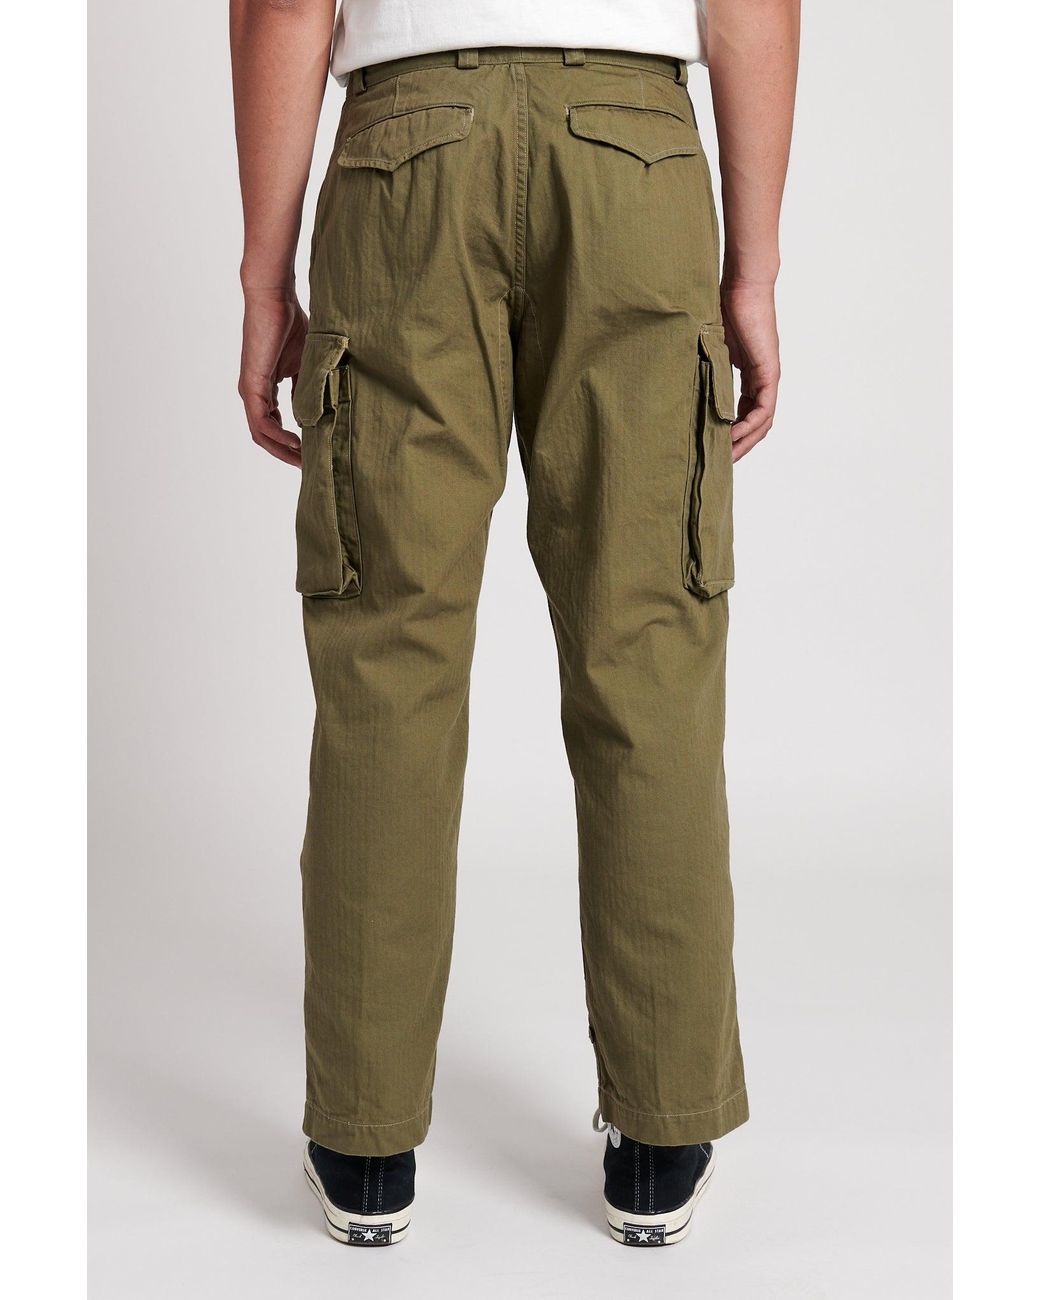 Orslow M-47 French Army Cargo Pants in Army Green (Green) for 